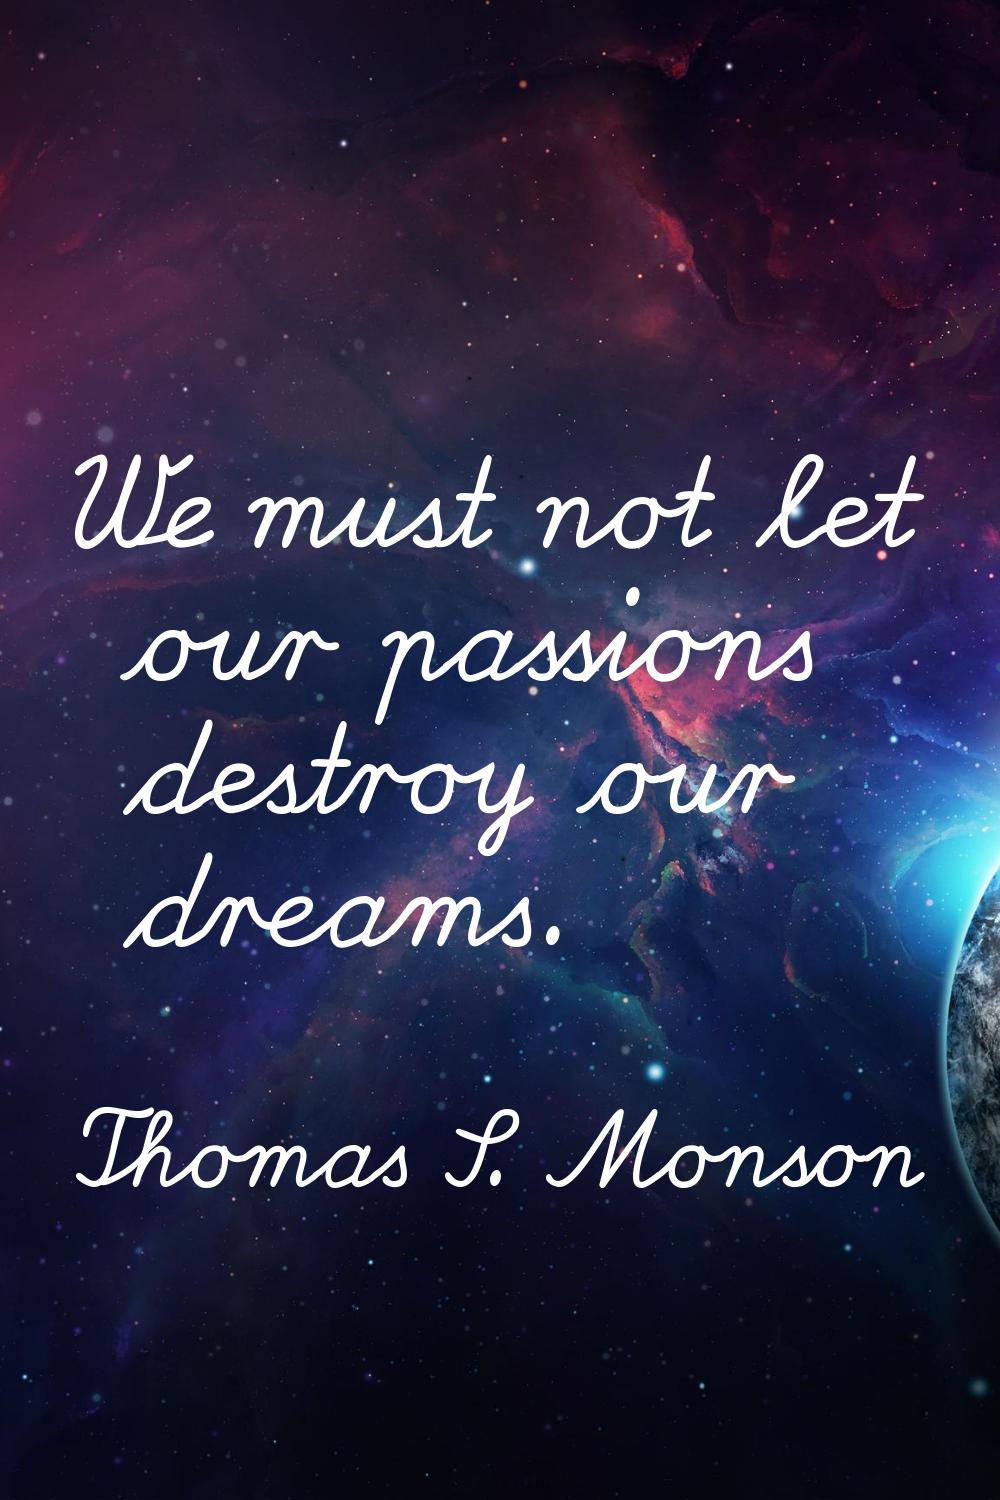 We must not let our passions destroy our dreams.